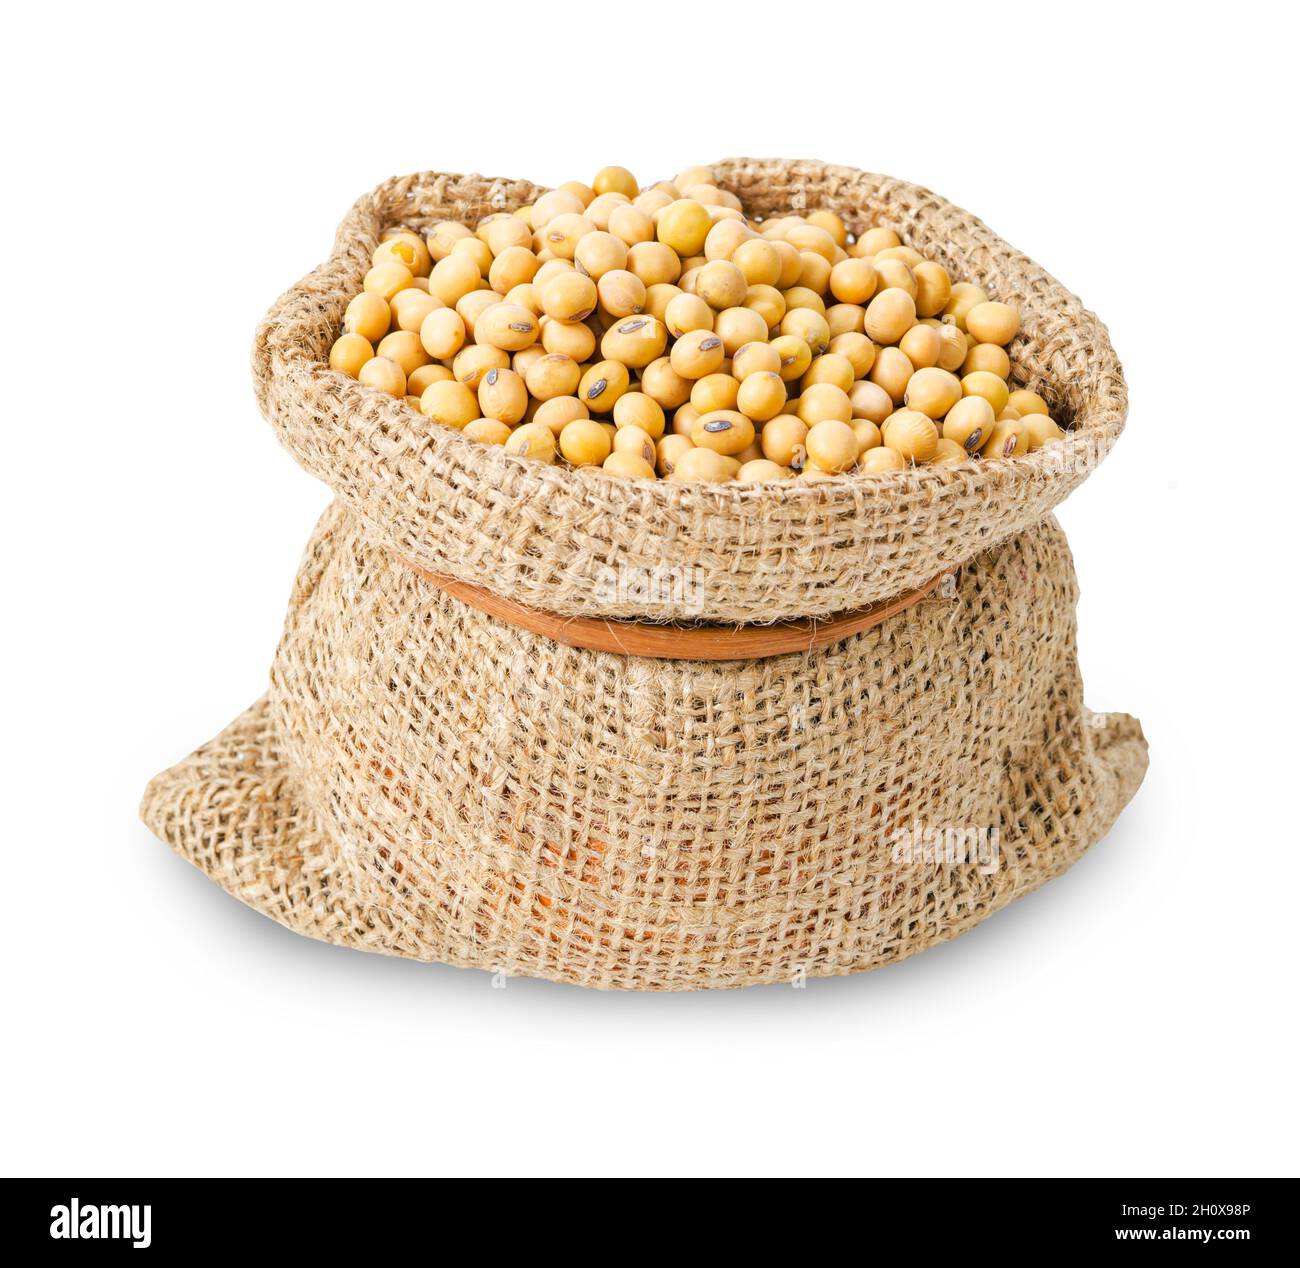 Dried soya beans in bag sack isolated on white background, Save clipping path. Stock Photo